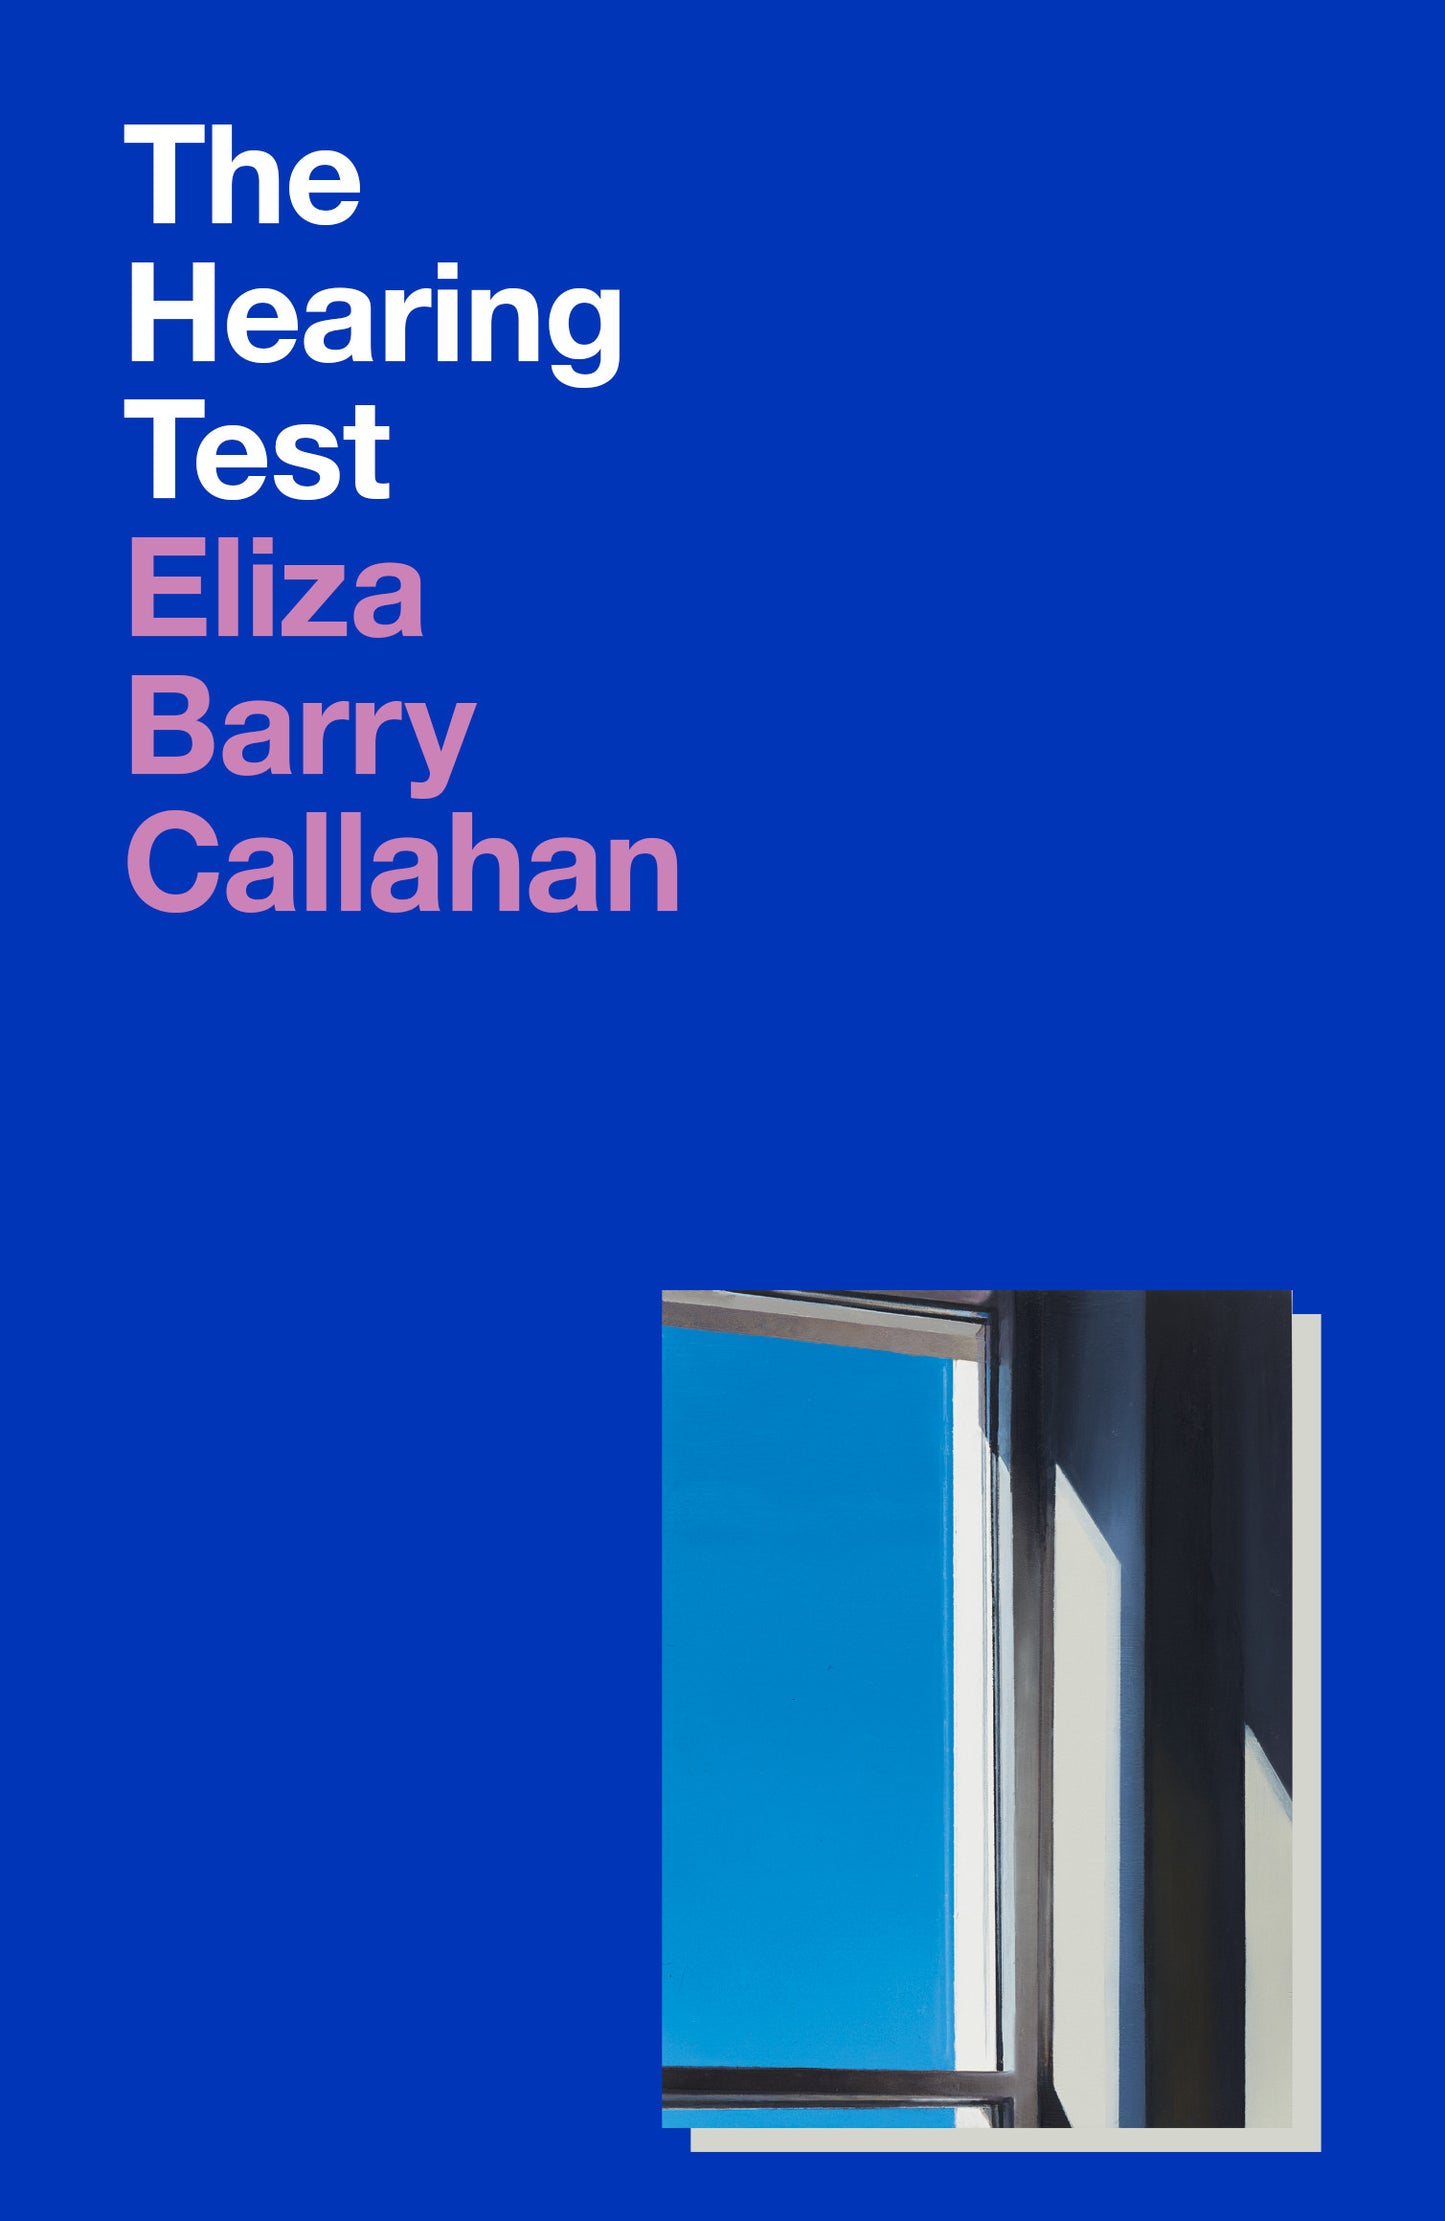 PRE-ORDER The Hearing Test by Eliza Barry Callahan